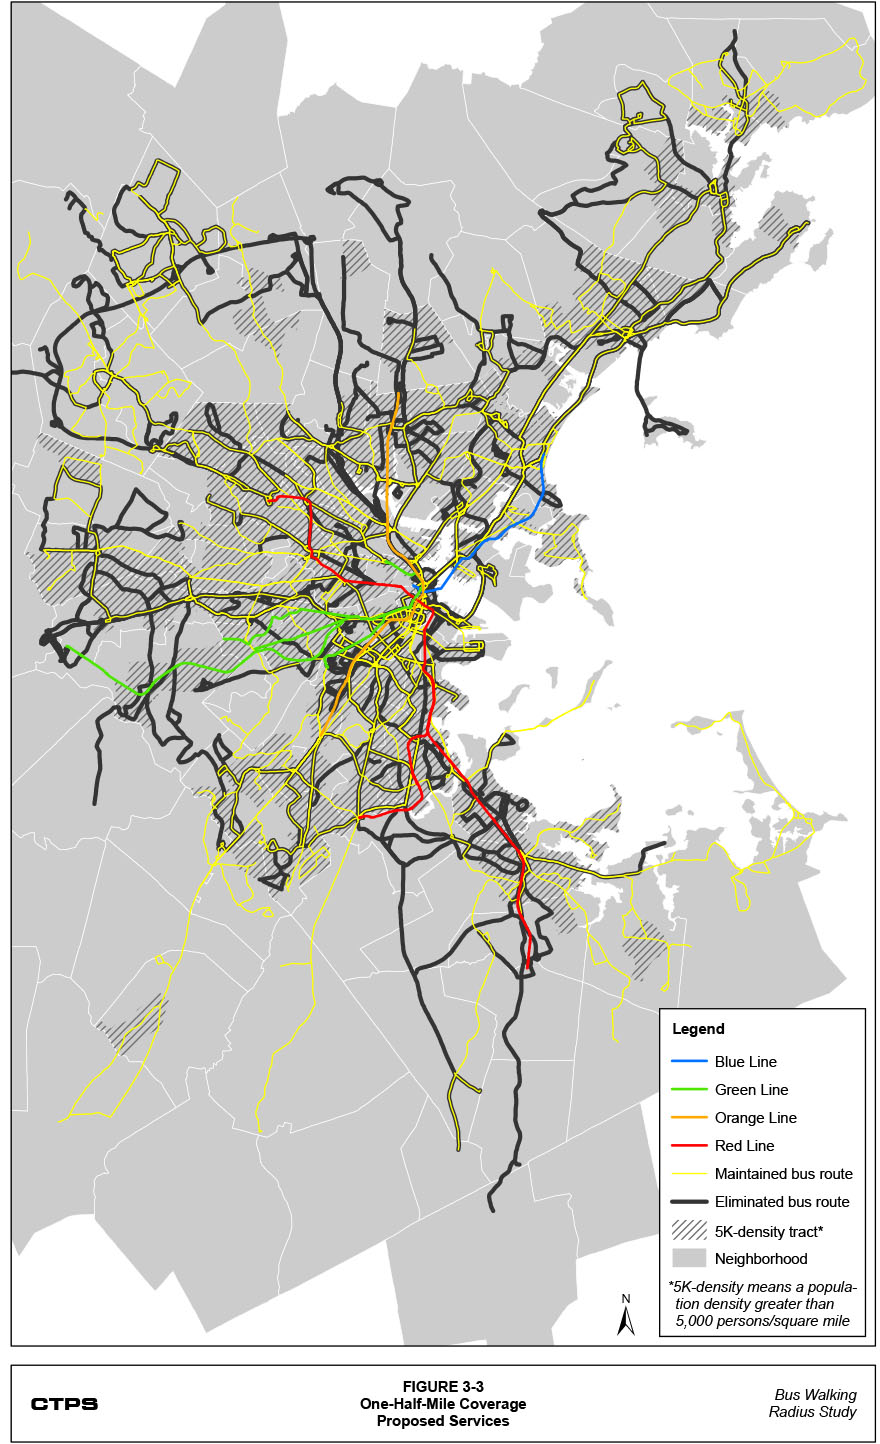 Figure 3-3: One-Half-Mile Coverage Proposed Services. This is a map that shows the transit routes that are proposed for maintenance and elimination in the service plan for the one-half-mile coverage threshold. The map also shows the location of census tracts with a population density greater than 5,000 persons per square mile.